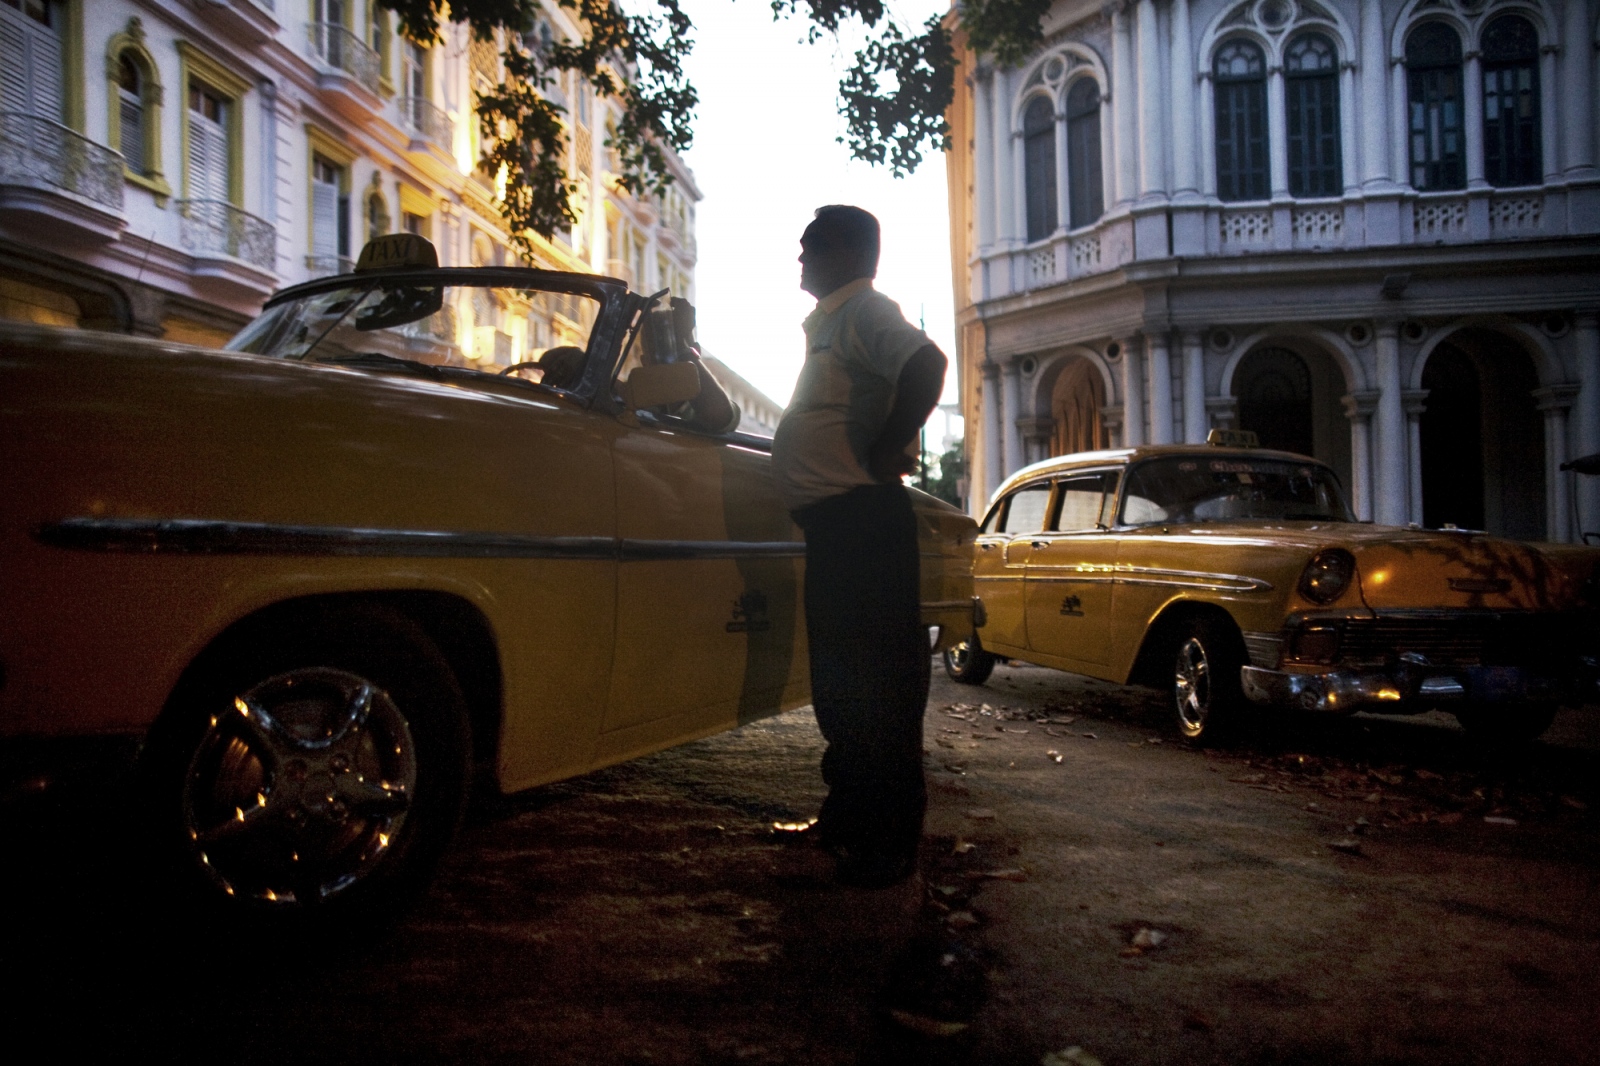 ¡Cuba Libre! - State employed taxi drivers wait for fares in Havana...